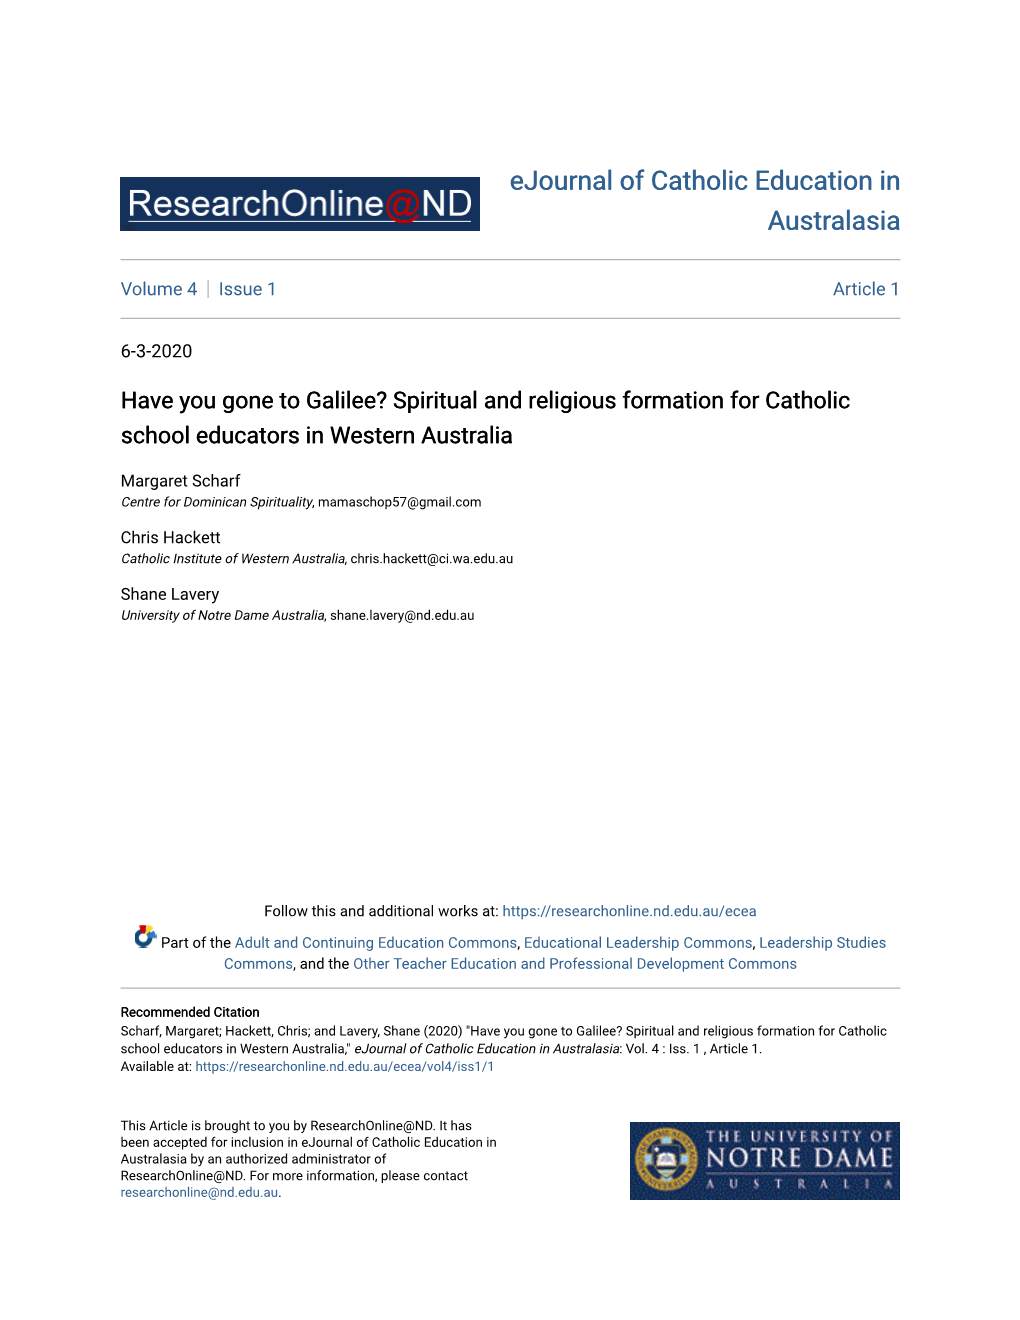 Have You Gone to Galilee? Spiritual and Religious Formation for Catholic School Educators in Western Australia